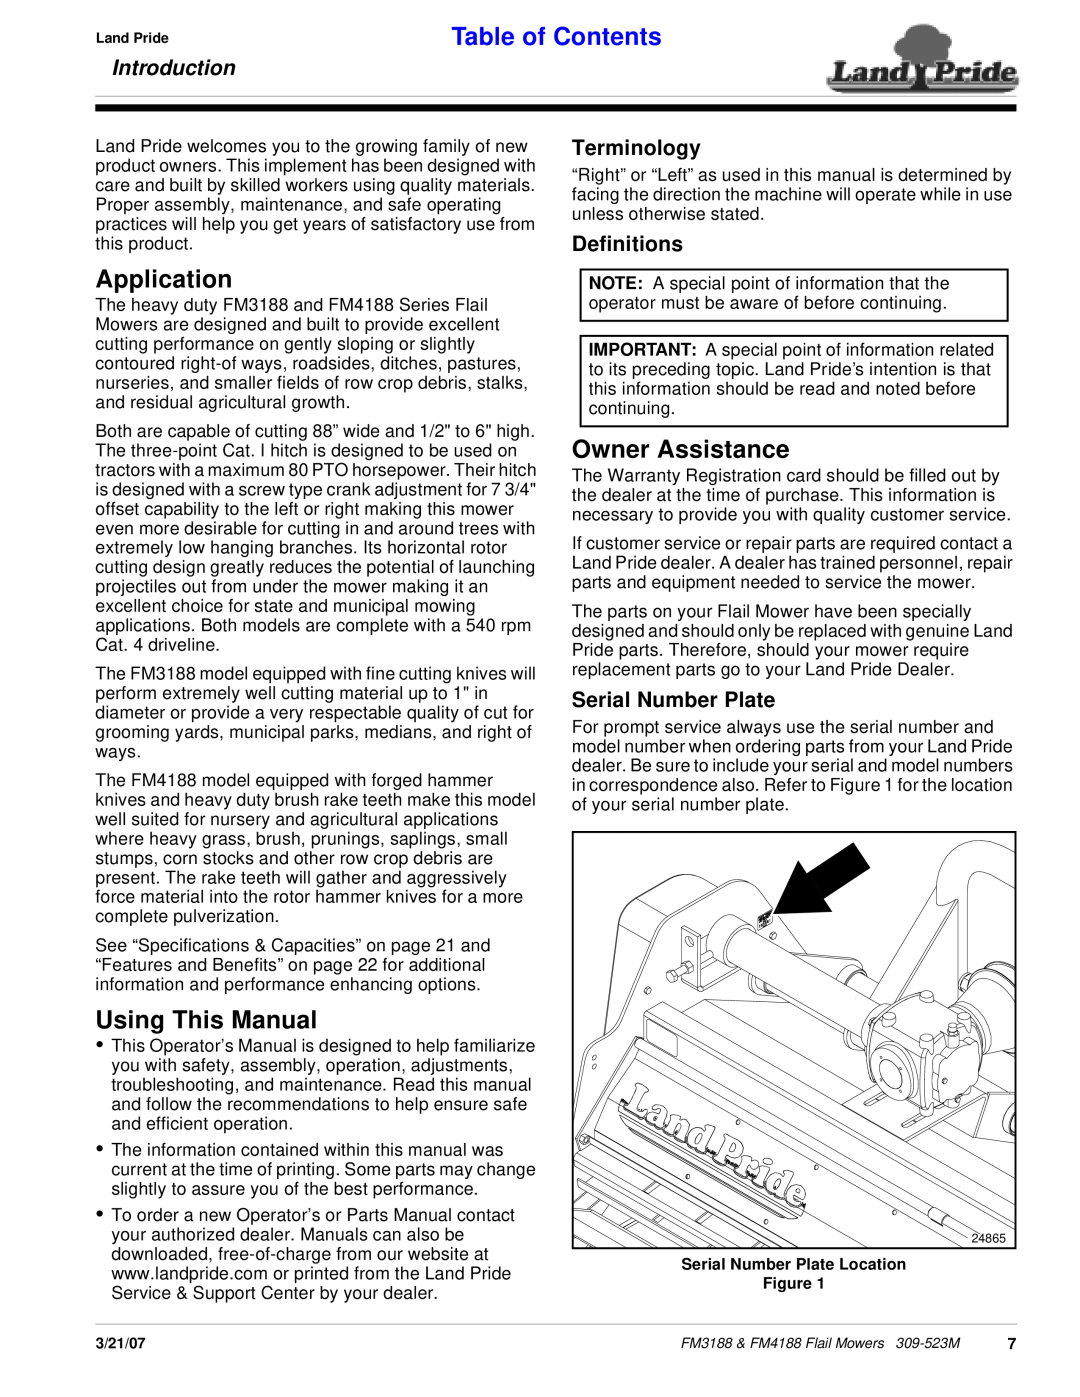 Land Pride FM3188, FM4188 manual Application, Using This Manual, Owner Assistance, Introduction, Table of Contents 